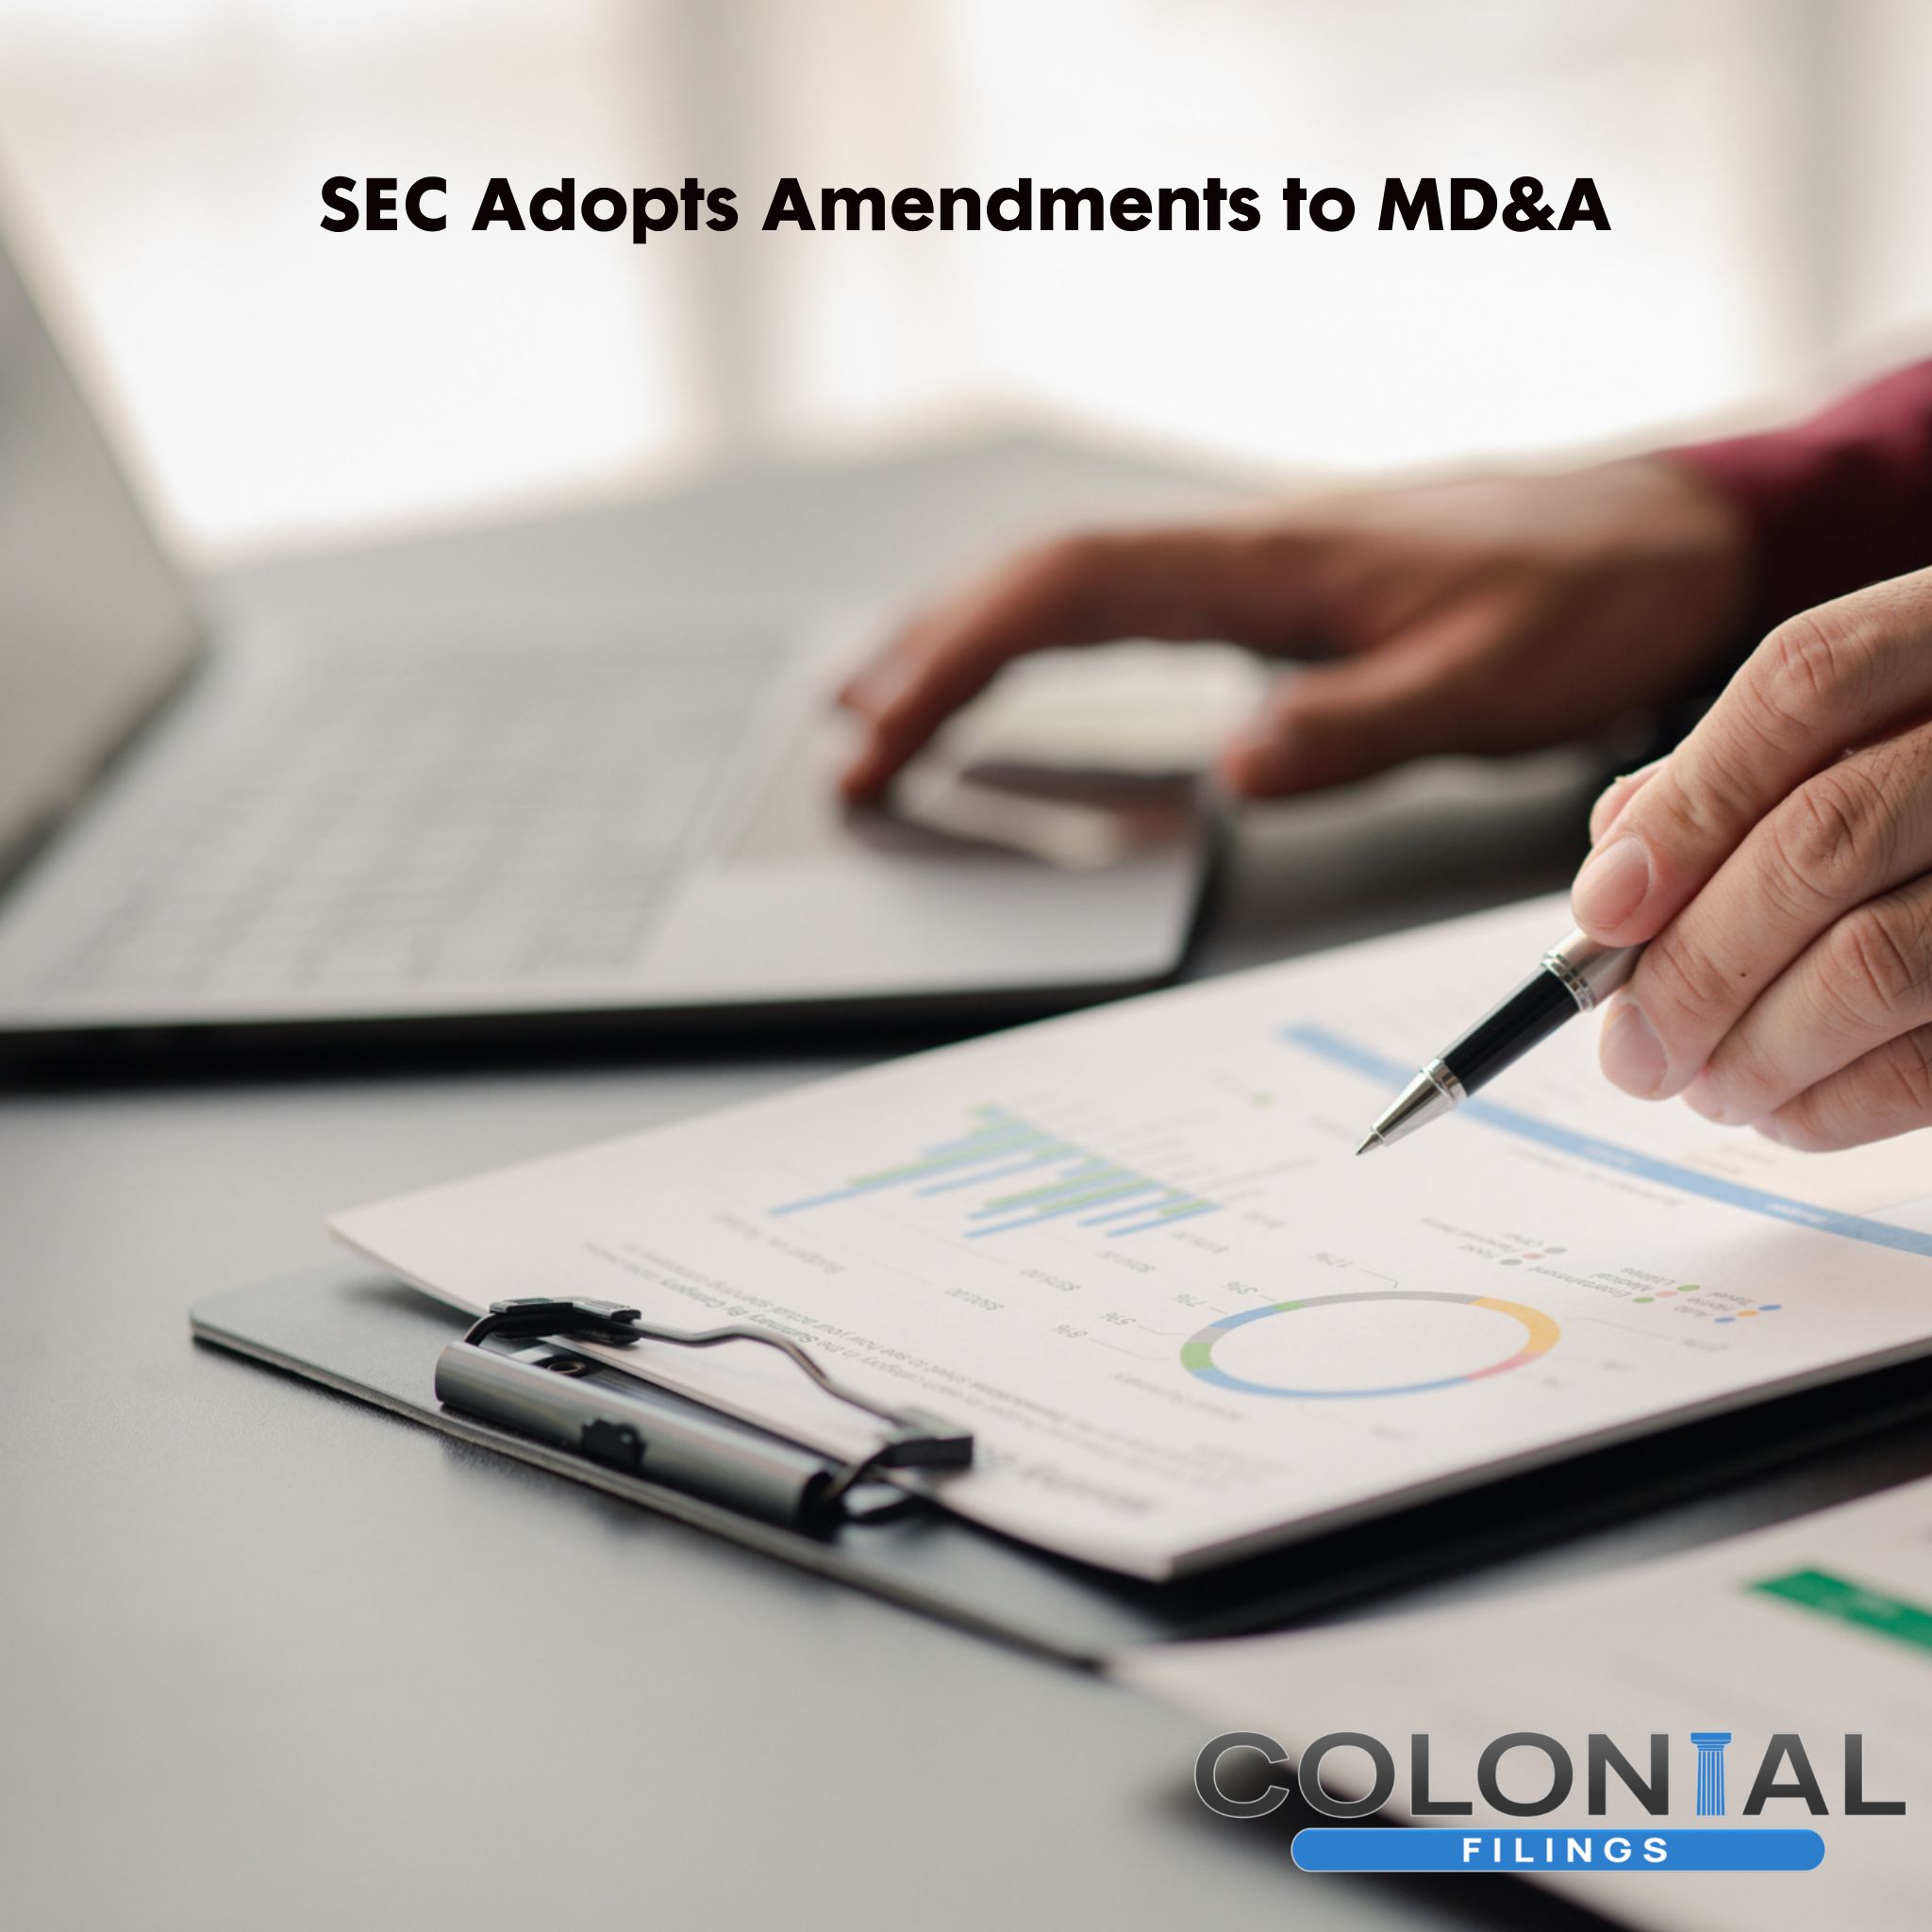 SEC Adopts Amendments to Modernize and Enhance MD&A and other Financial Disclosures